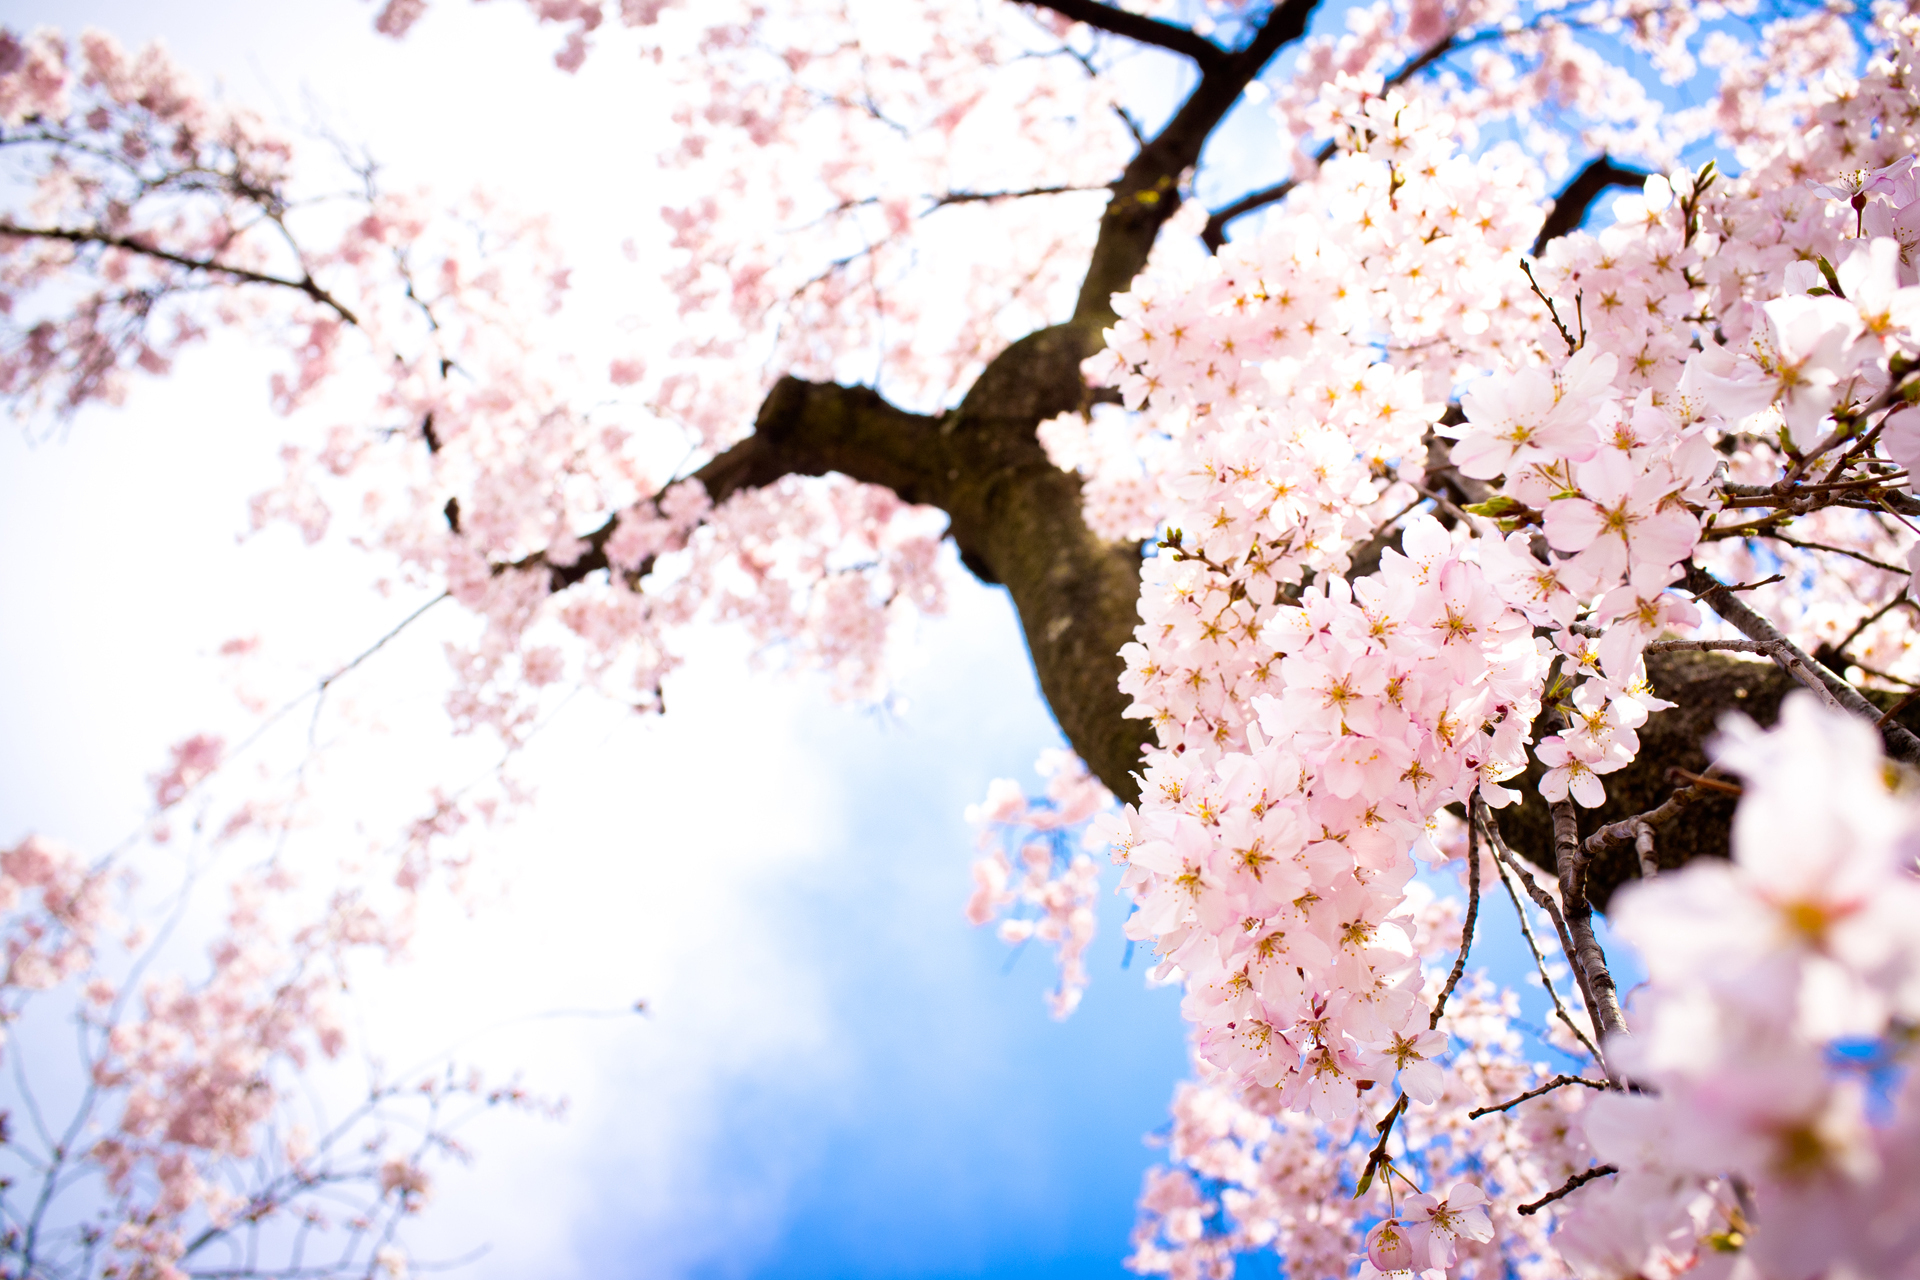 High Res Cherry Blossom Wallpapers 766026 Wall